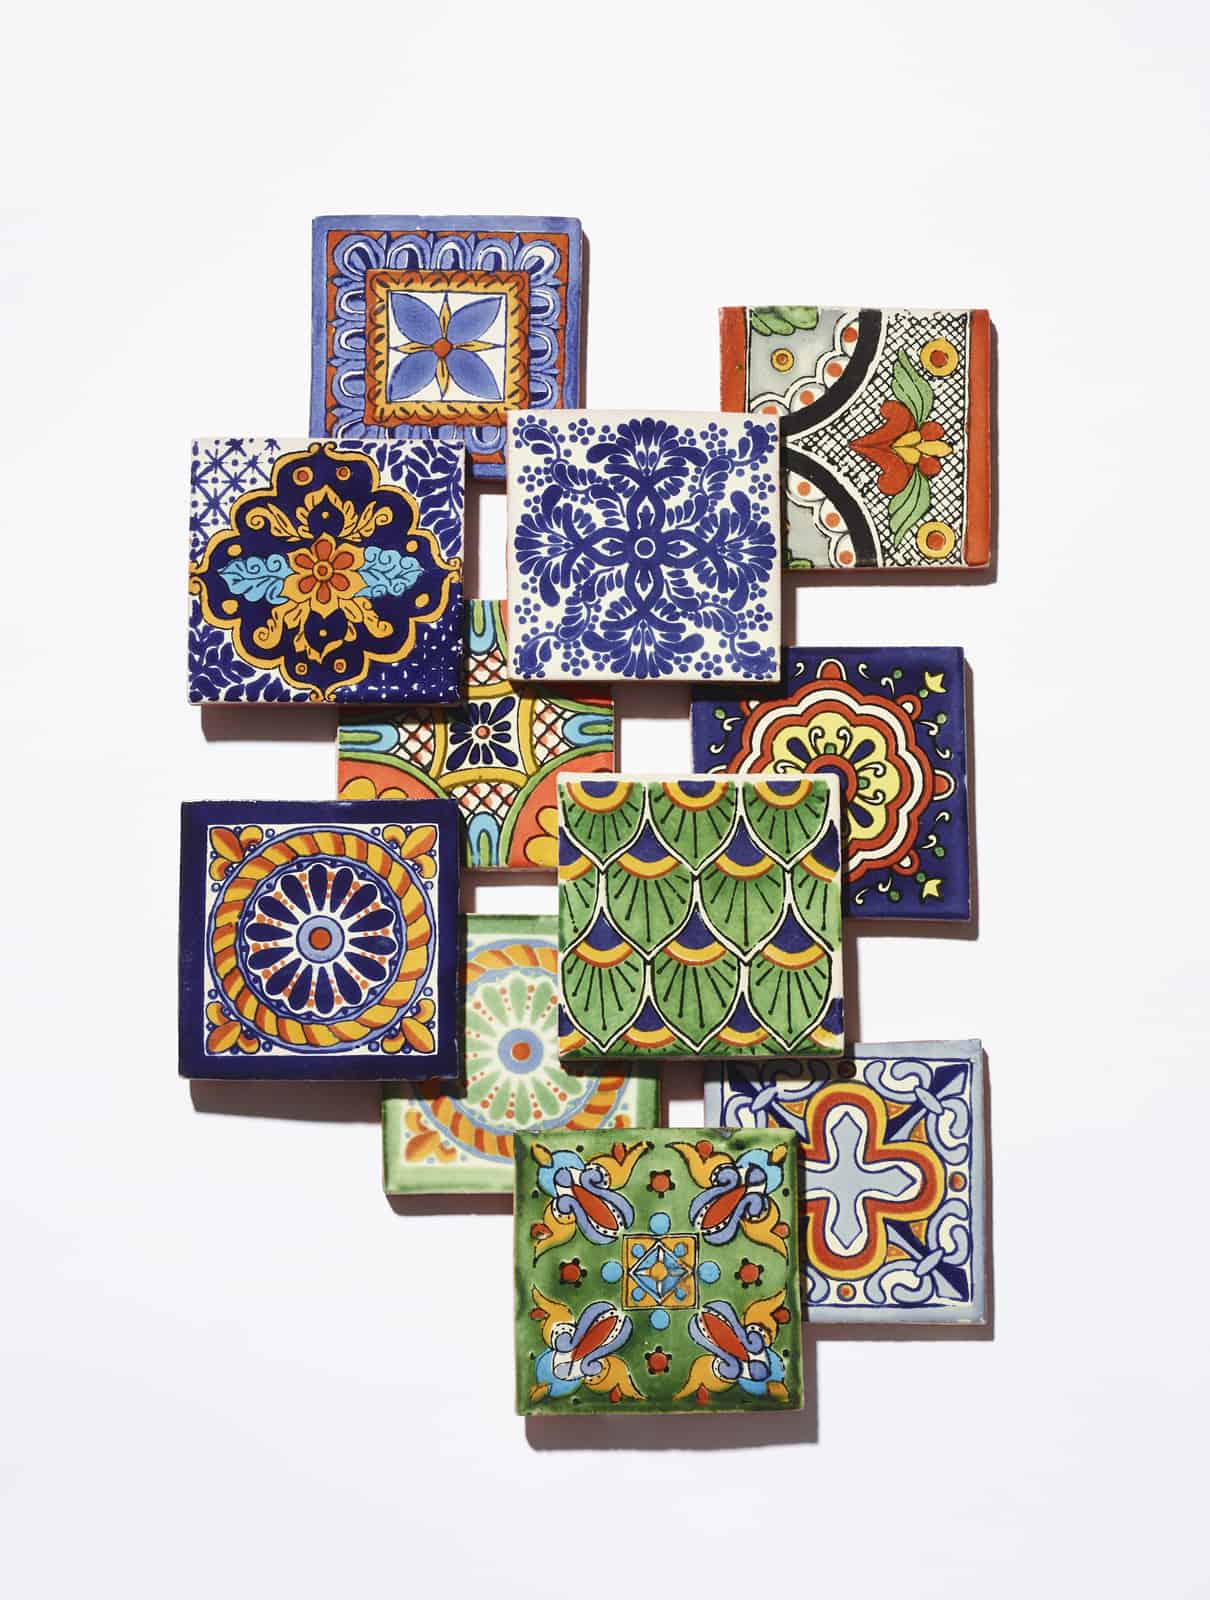 Talavera Tiles History And Influence On, Mexican Tile Denver